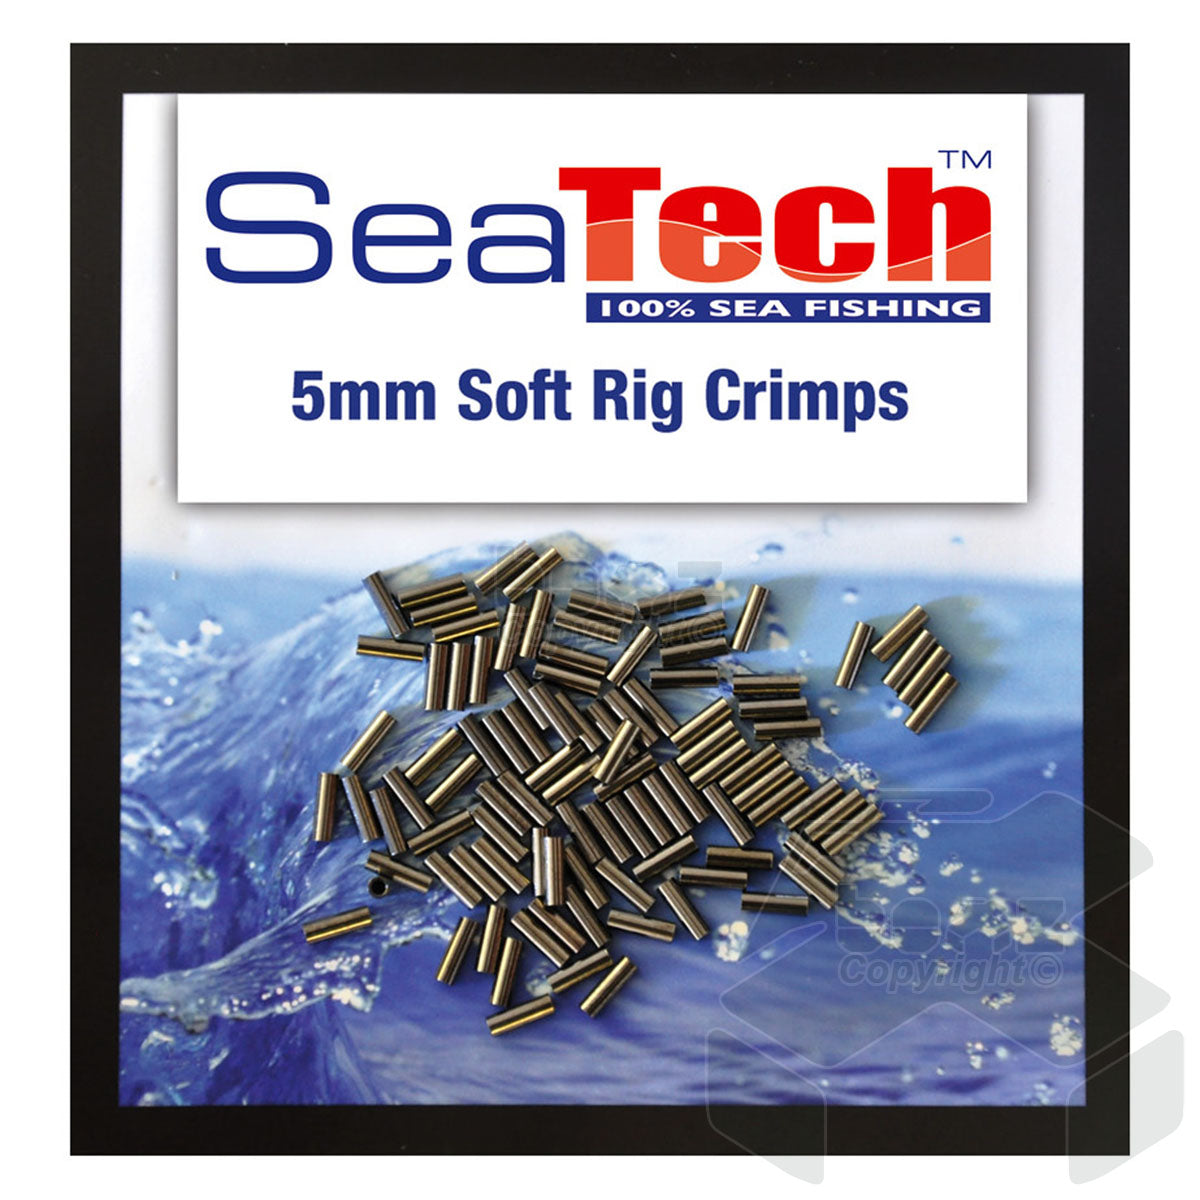 Seatech Soft Rig Clips